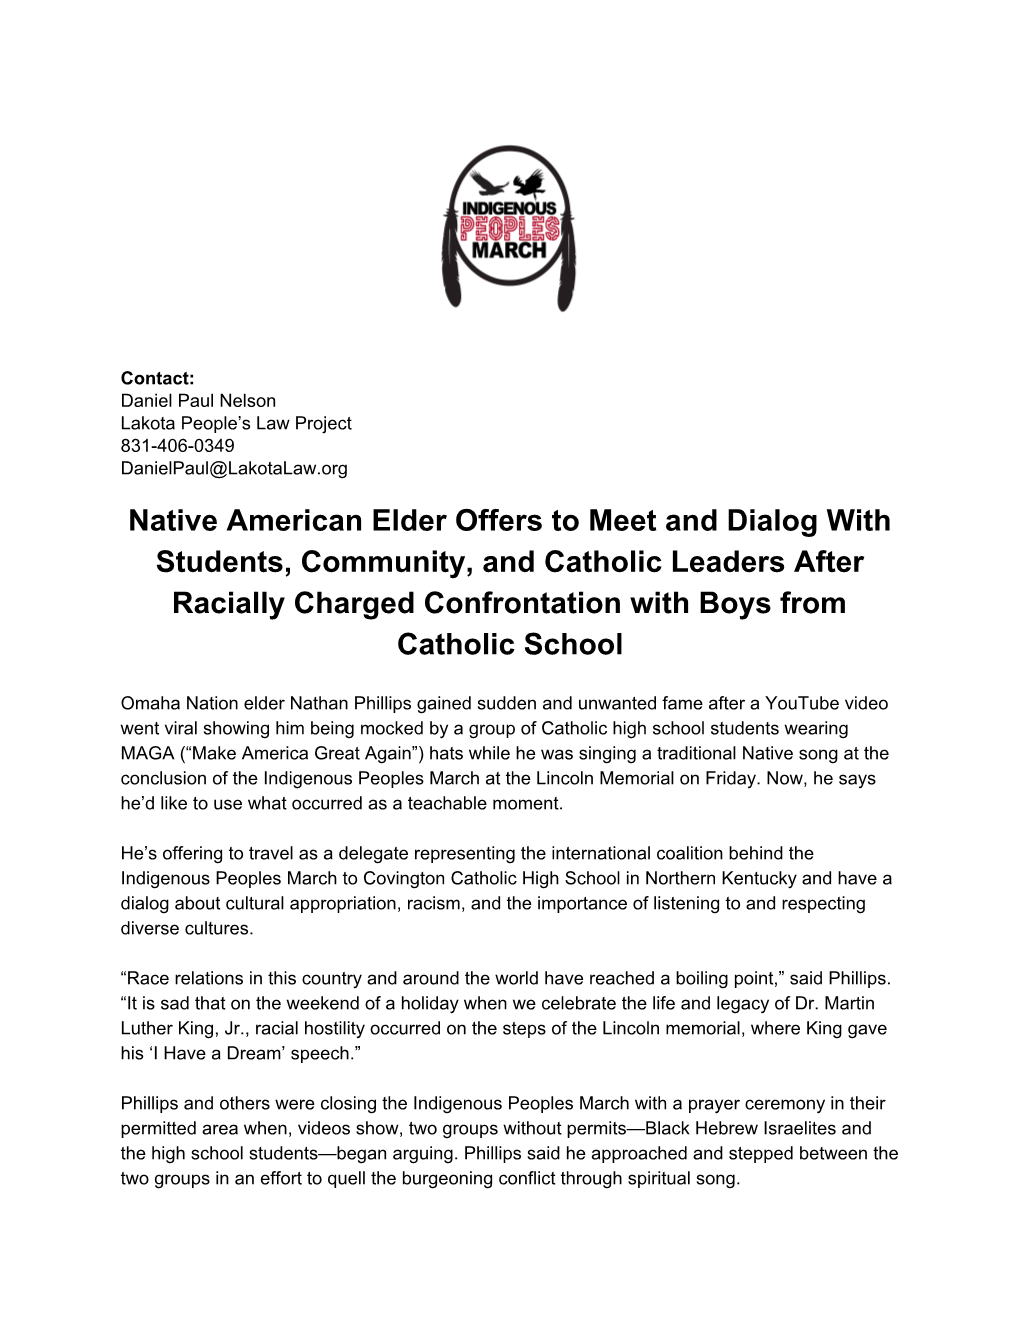 Native American Elder Offers to Meet and Dialog with Students, Community, and Catholic Leaders After Racially Charged Confrontation with Boys from Catholic School